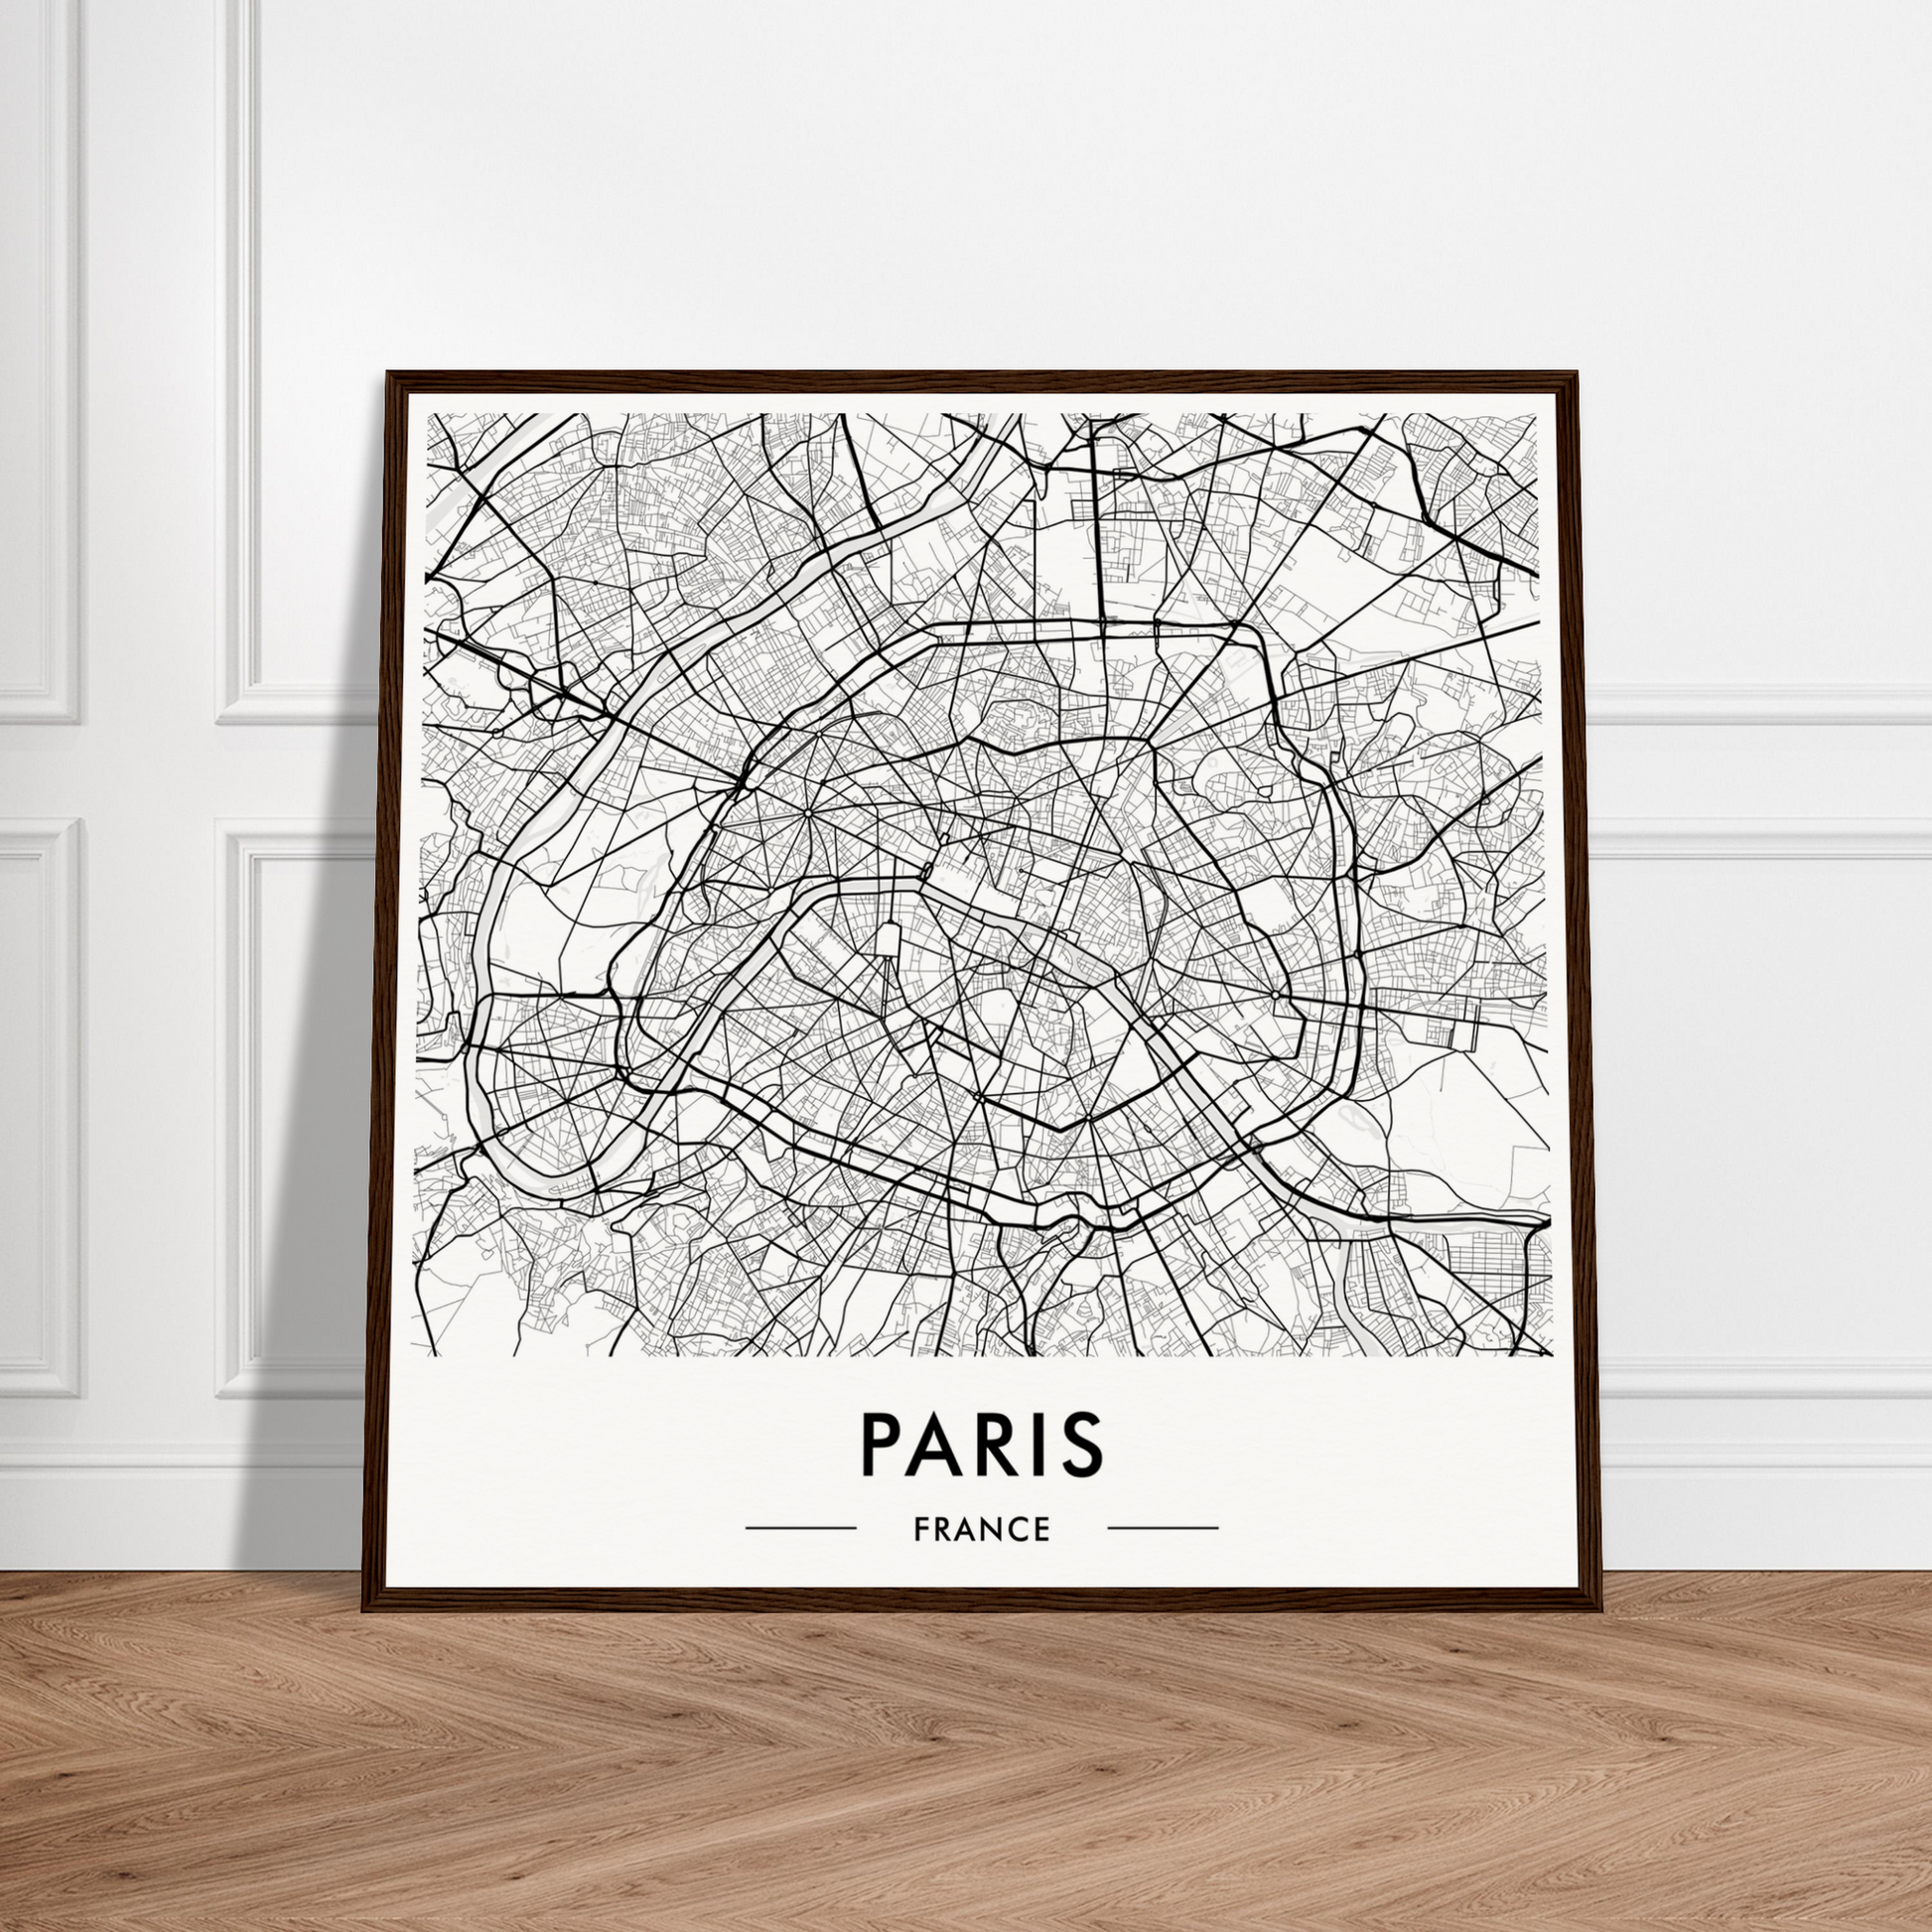 I want a Paris Map The Oracle Windows™ Collection for my wall in Paris, France showcasing a black and white map.